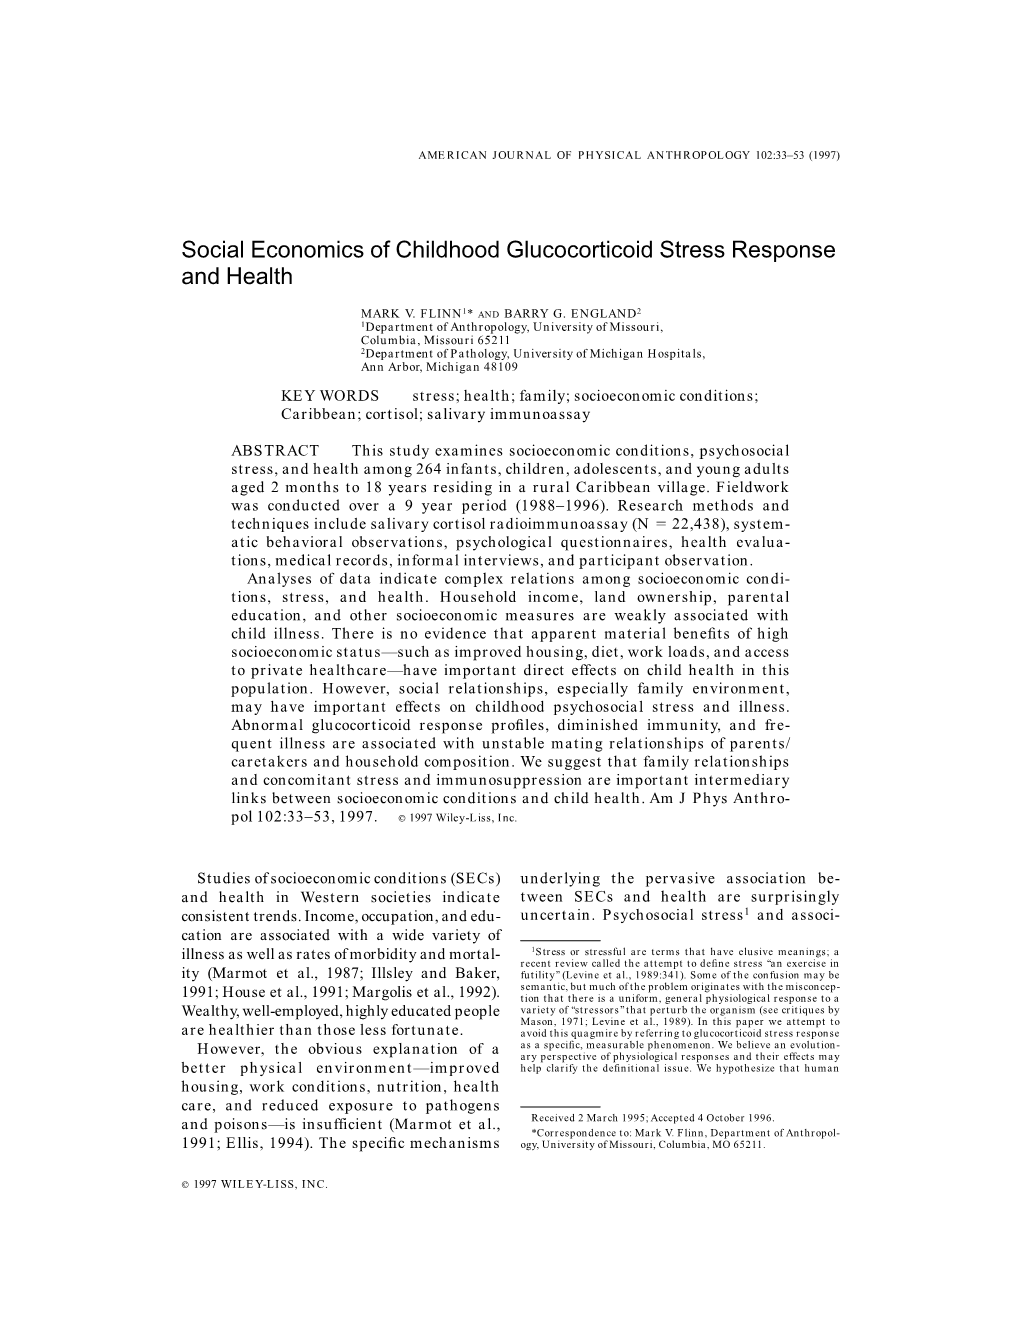 Social Economics of Childhood Glucocorticoid Stress Response and Health